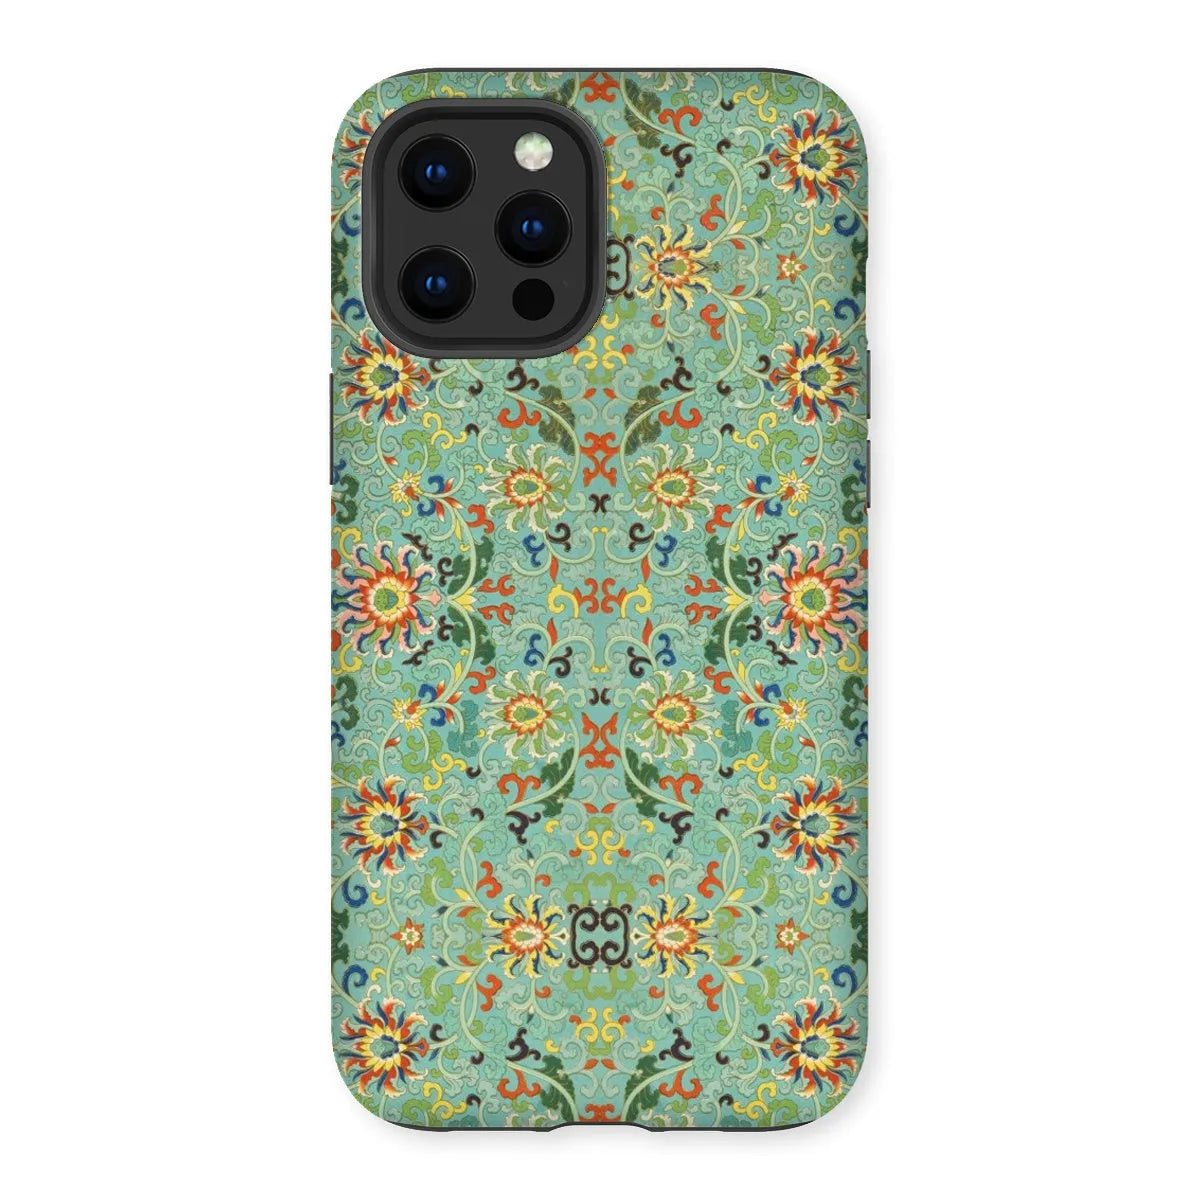 Lotus Candy - Chinese Aesthetic Pattern Art Phone Case - Iphone 12 Pro Max / Matte - Mobile Phone Cases - Aesthetic Art